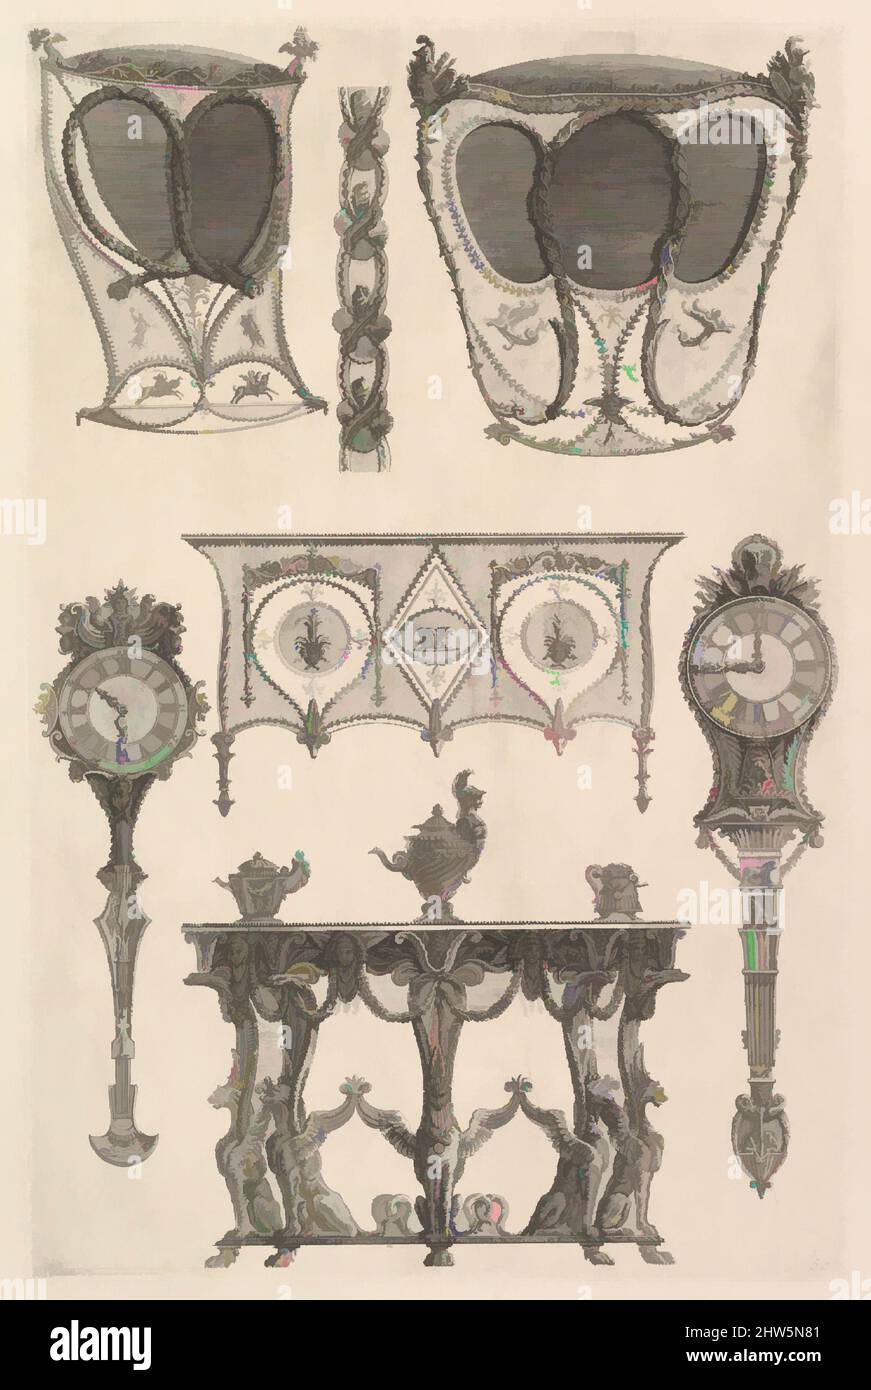 Art inspired by A sedan chair, a coach, a commode, a side table and two clocks (Deux ch. à porteurs v. de côté, une commode, une console, deux pedules, un meuble indét), from Diverse Maniere d'adornare i cammini ed ogni altra parte degli edifizi...(Different Ways of ornamenting, Classic works modernized by Artotop with a splash of modernity. Shapes, color and value, eye-catching visual impact on art. Emotions through freedom of artworks in a contemporary way. A timeless message pursuing a wildly creative new direction. Artists turning to the digital medium and creating the Artotop NFT Stock Photo